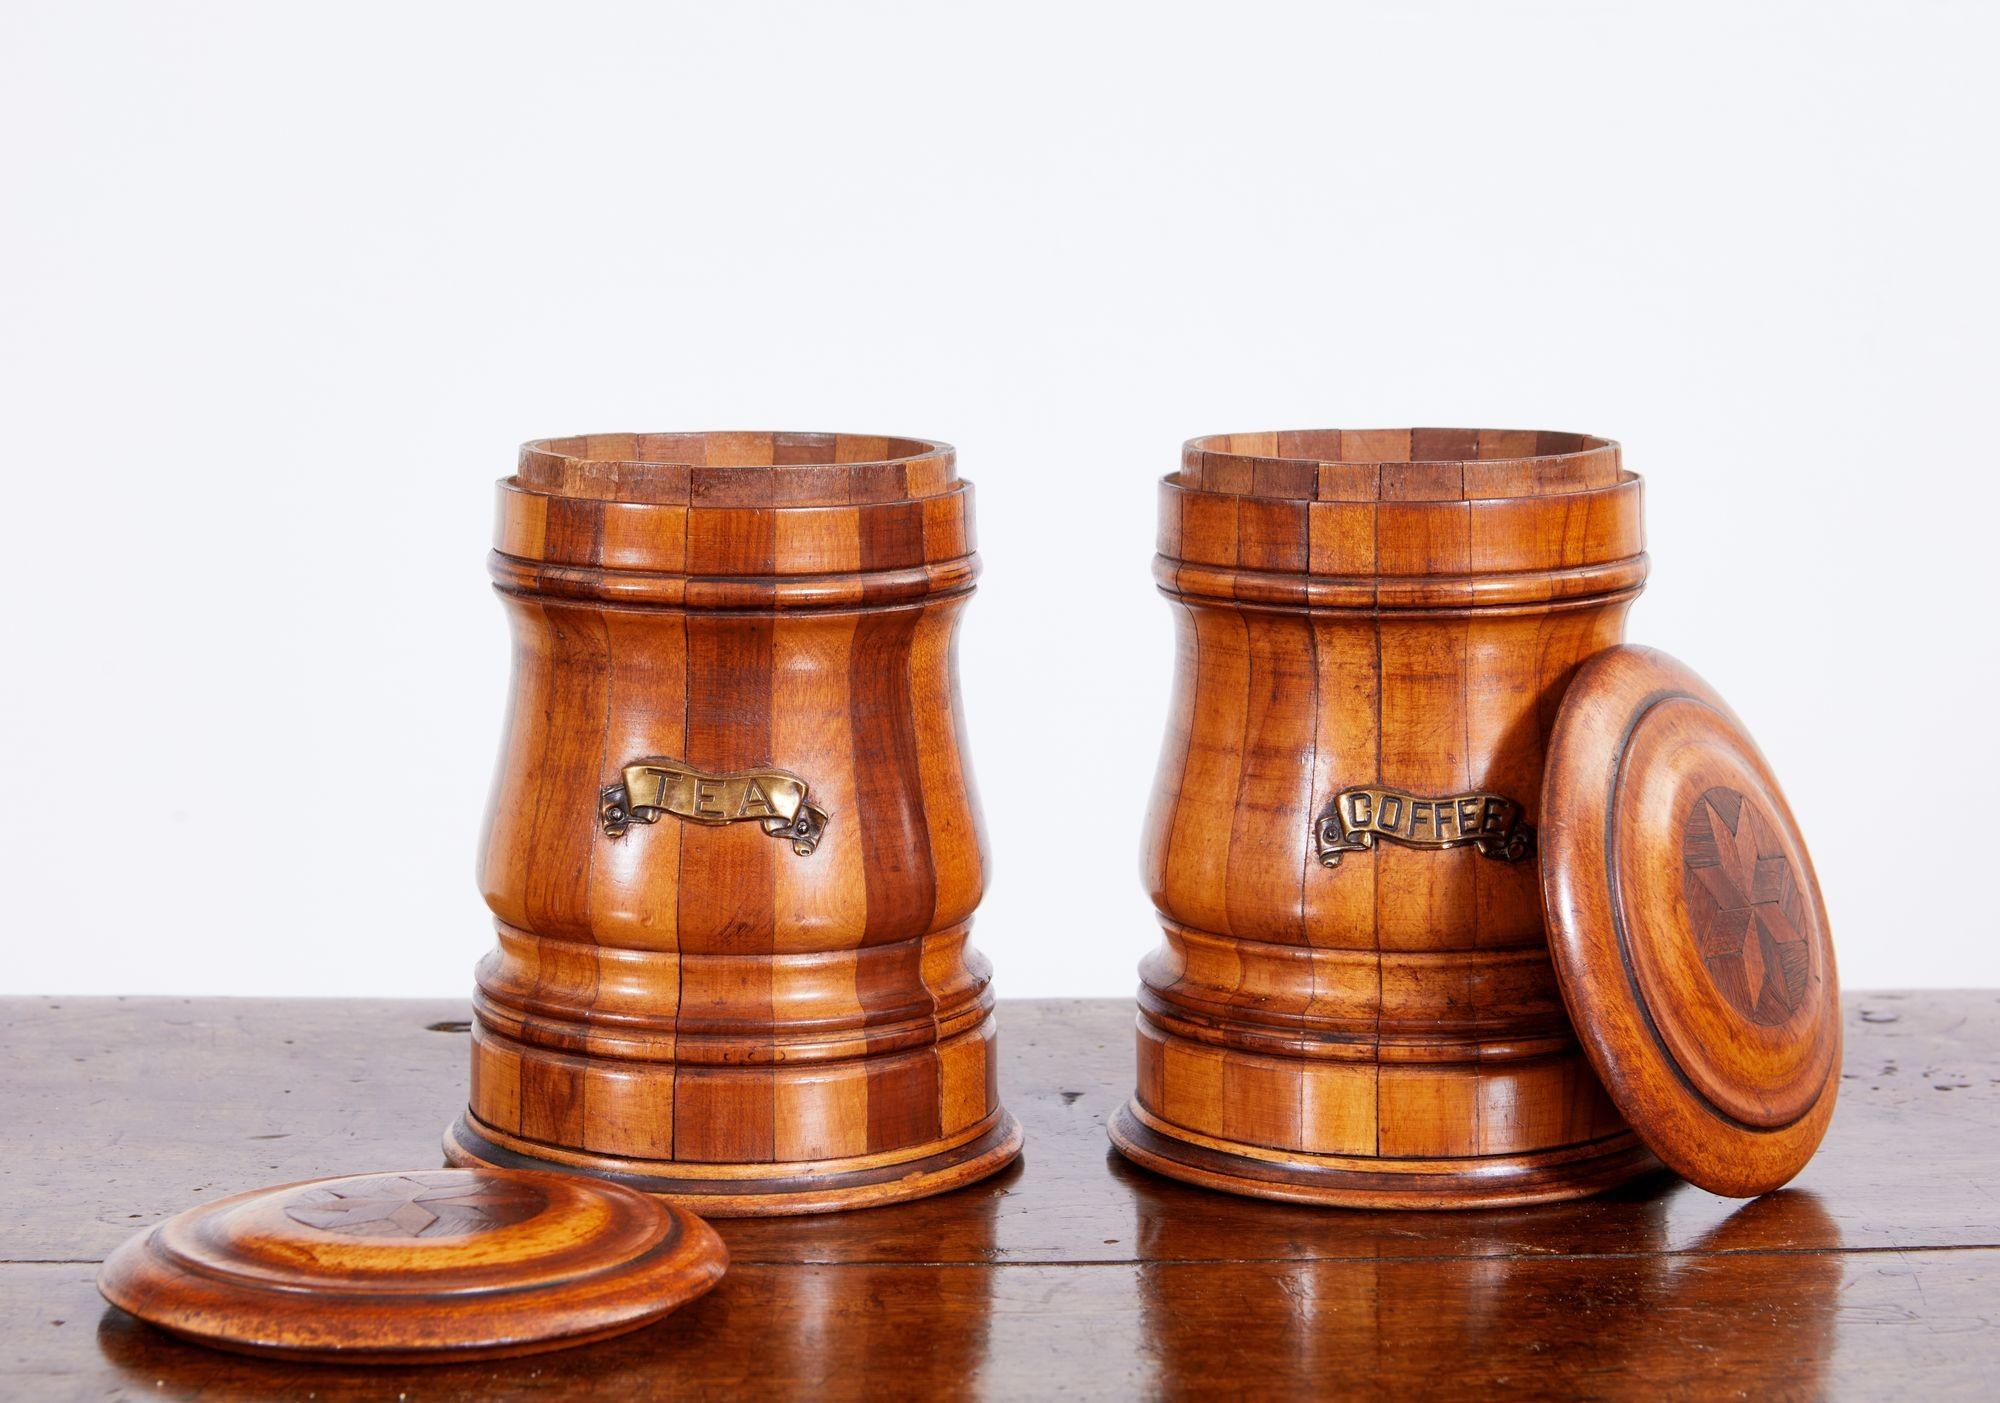 Good pair of late 19th Century English or Scottish mixed wood treen coffee and tea containers, having compass star inlaid turned lids over turned bodies of mixed mahogany and birch staved construction, one labeled 